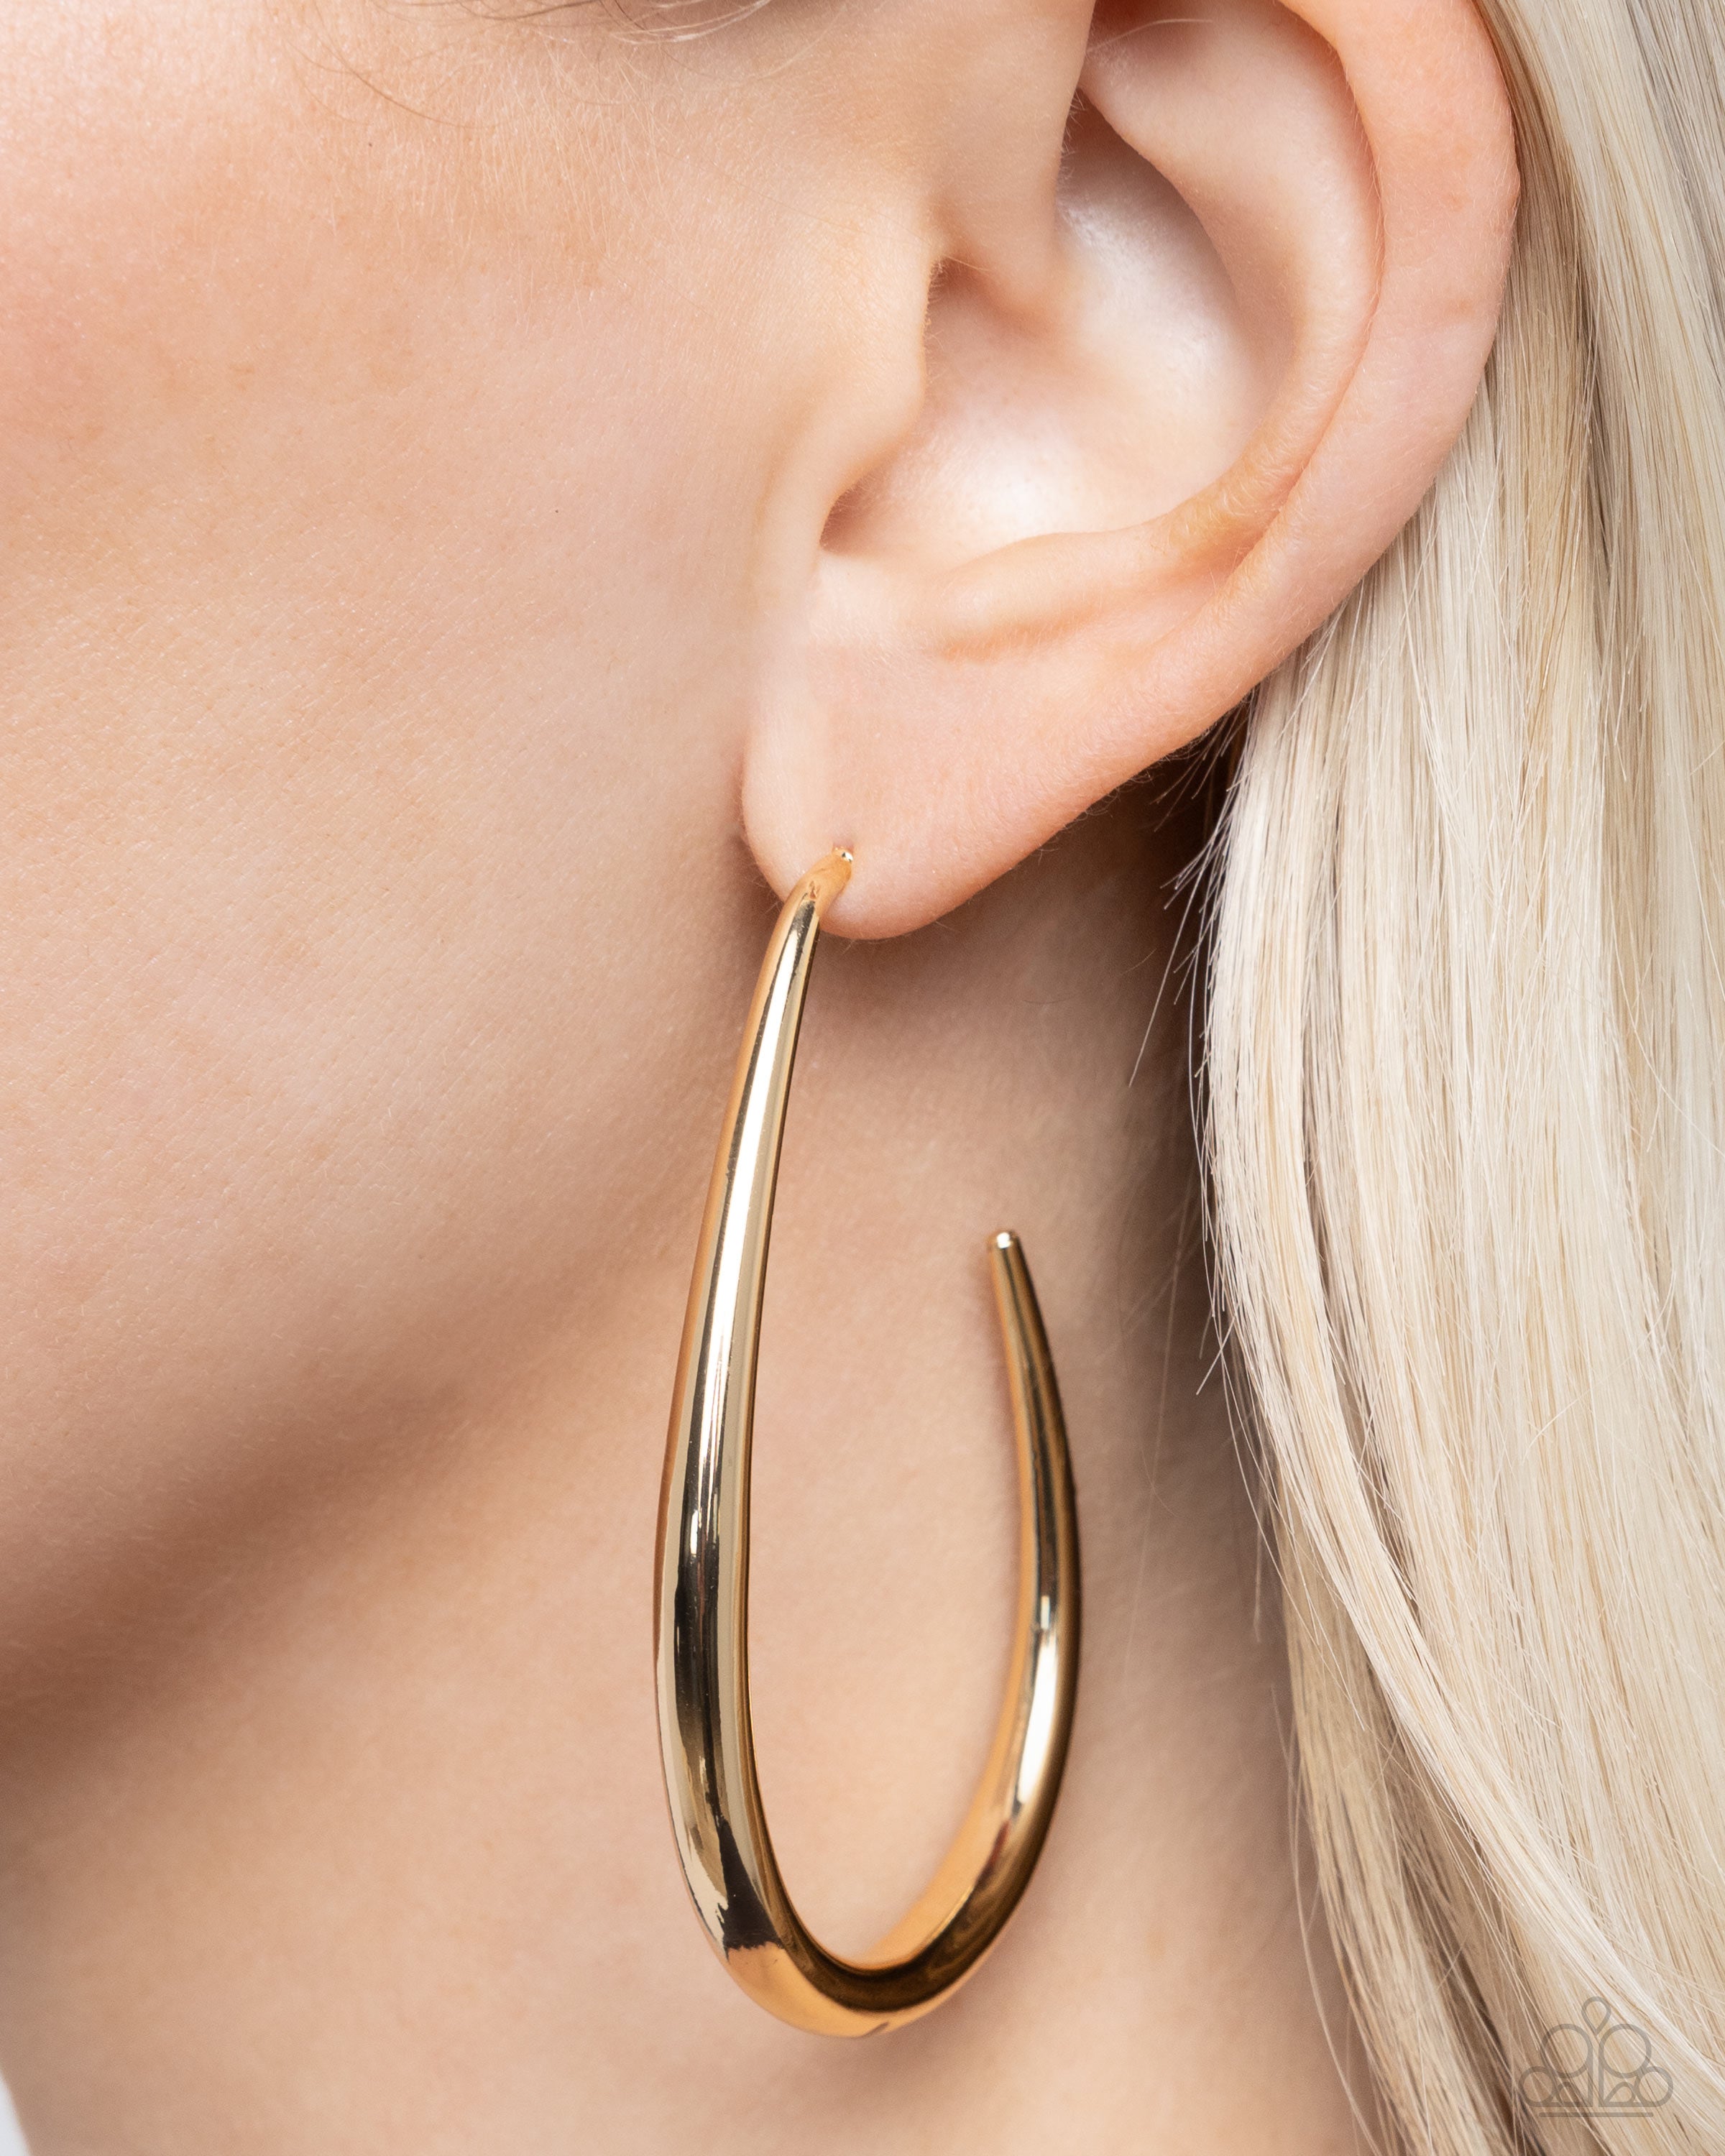 EXCLUSIVE ELEMENT GOLD-EARRINGS